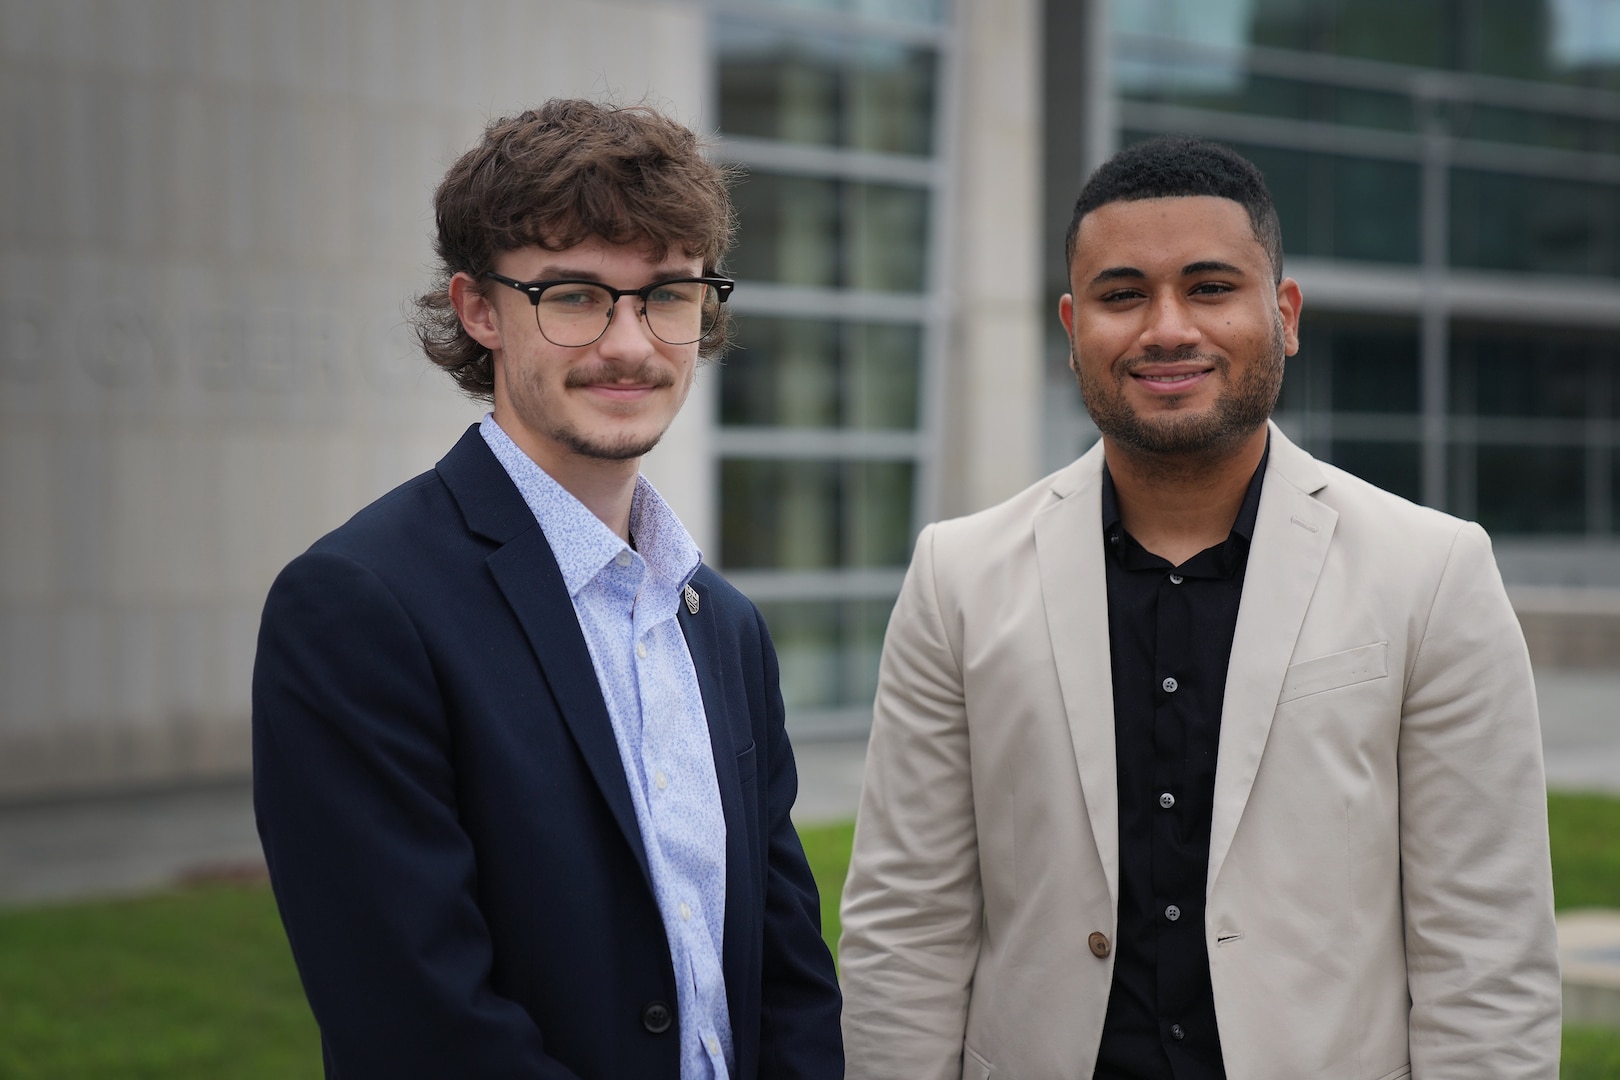 Ethan Marshall (left) and Jimmy Rodriguez, U.S. Air Force Premier College Interns, stand near the U.S. Cyber Command Integrated Cyber Center at Fort George G. Meade, Md., Aug. 18, 2021.